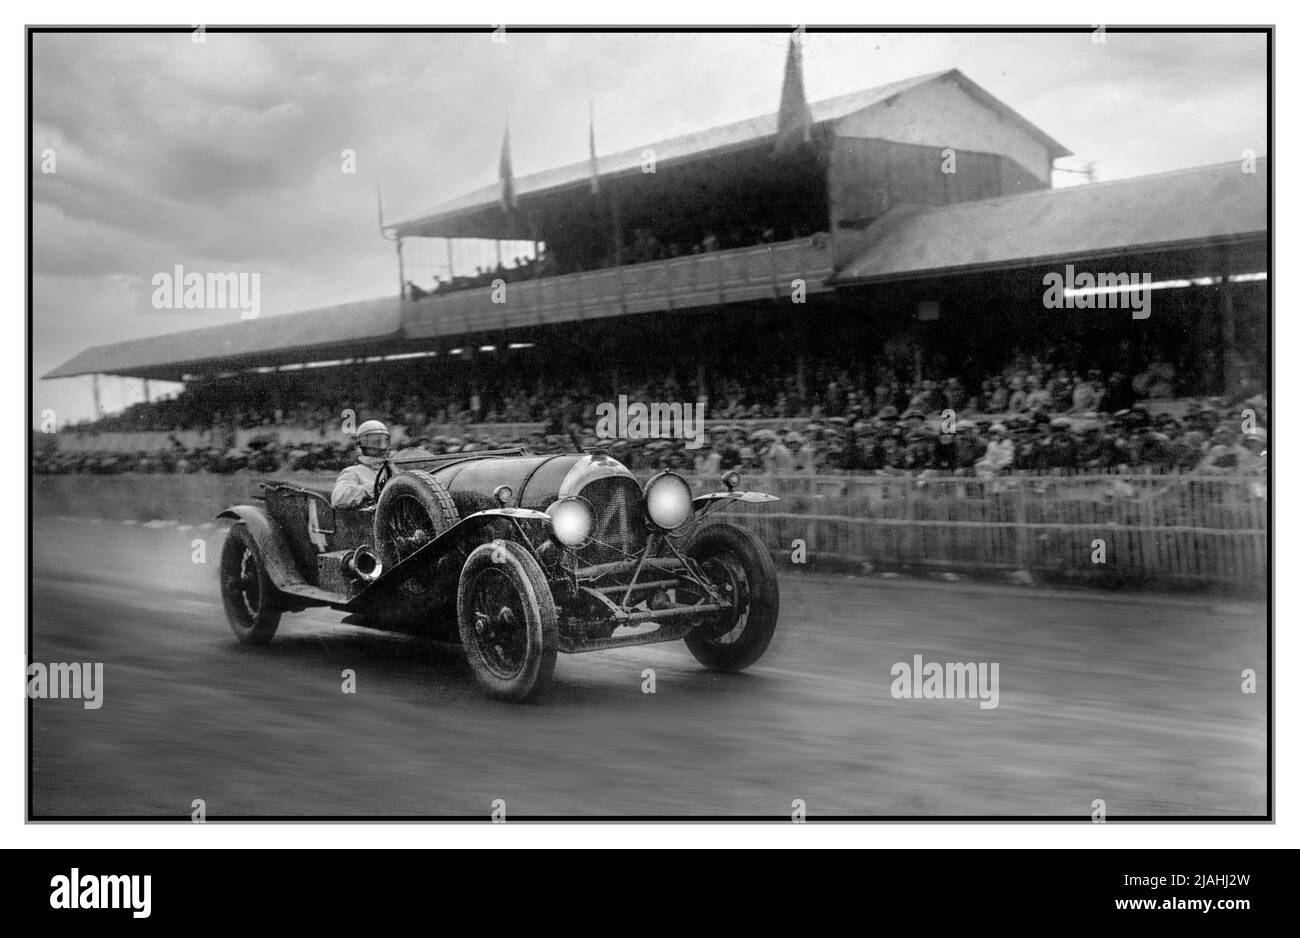 1928 LE MANS 24 HRS WINNER Bentley Number 4 of Barnato and Rubin at dusk VINTAGE 24 Hours of Le Mans motor race. The 1928 24 Hours of Le Mans was the 6th Grand Prix of Endurance that took place at the Circuit de la Sarthe on 16 and 17 June 1928. Bentley director Woolf LE MANSBarnato and Australian-born Bernard Rubin in a Bentley 4½ Litre gave the company back-to-back victories after a race-long duel with the Stutz of Édouard Brisson and Robert Bloch. In the process they won the inaugural prize for overall distance. 'The Bentley Boys' Le Mans France Stock Photo